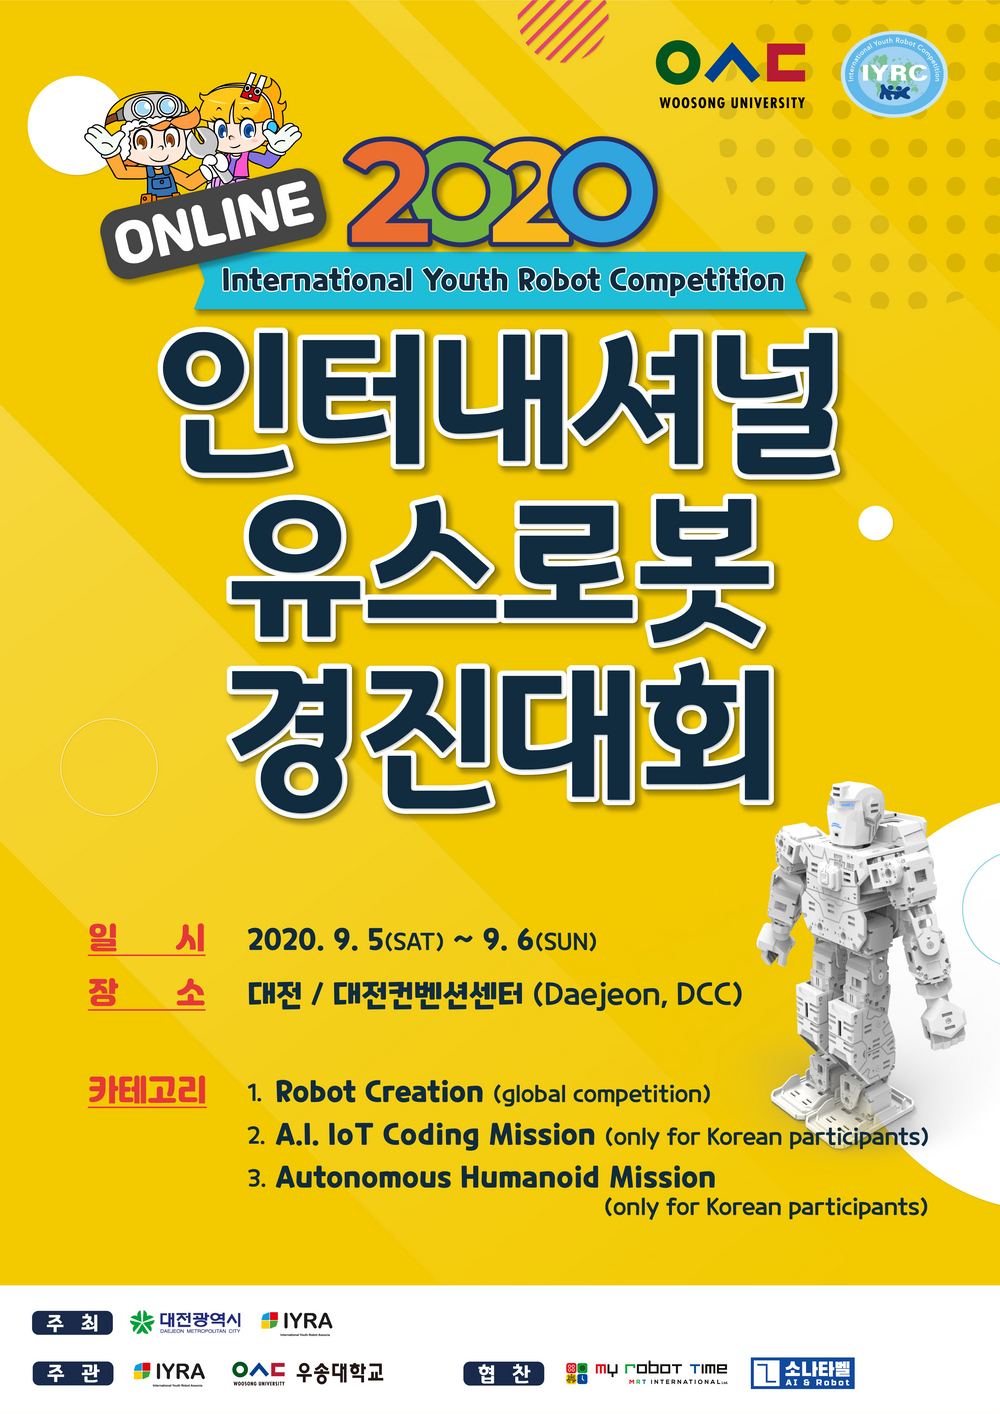 online 2020 international Youth Robot Competition 인터내셔널 유스로봇 경진대회 1.일시:2020.9.5(토)~9.6(일) 2.장소:대전/대전컨벤션센터(Daejeon,DCC) 3.카테고리:1)Robot Creation(global competition) 2)A.I IoT coding Mission(only for korean particpants) 3)Autonomous Humanoid Mission (only for korean particpants)